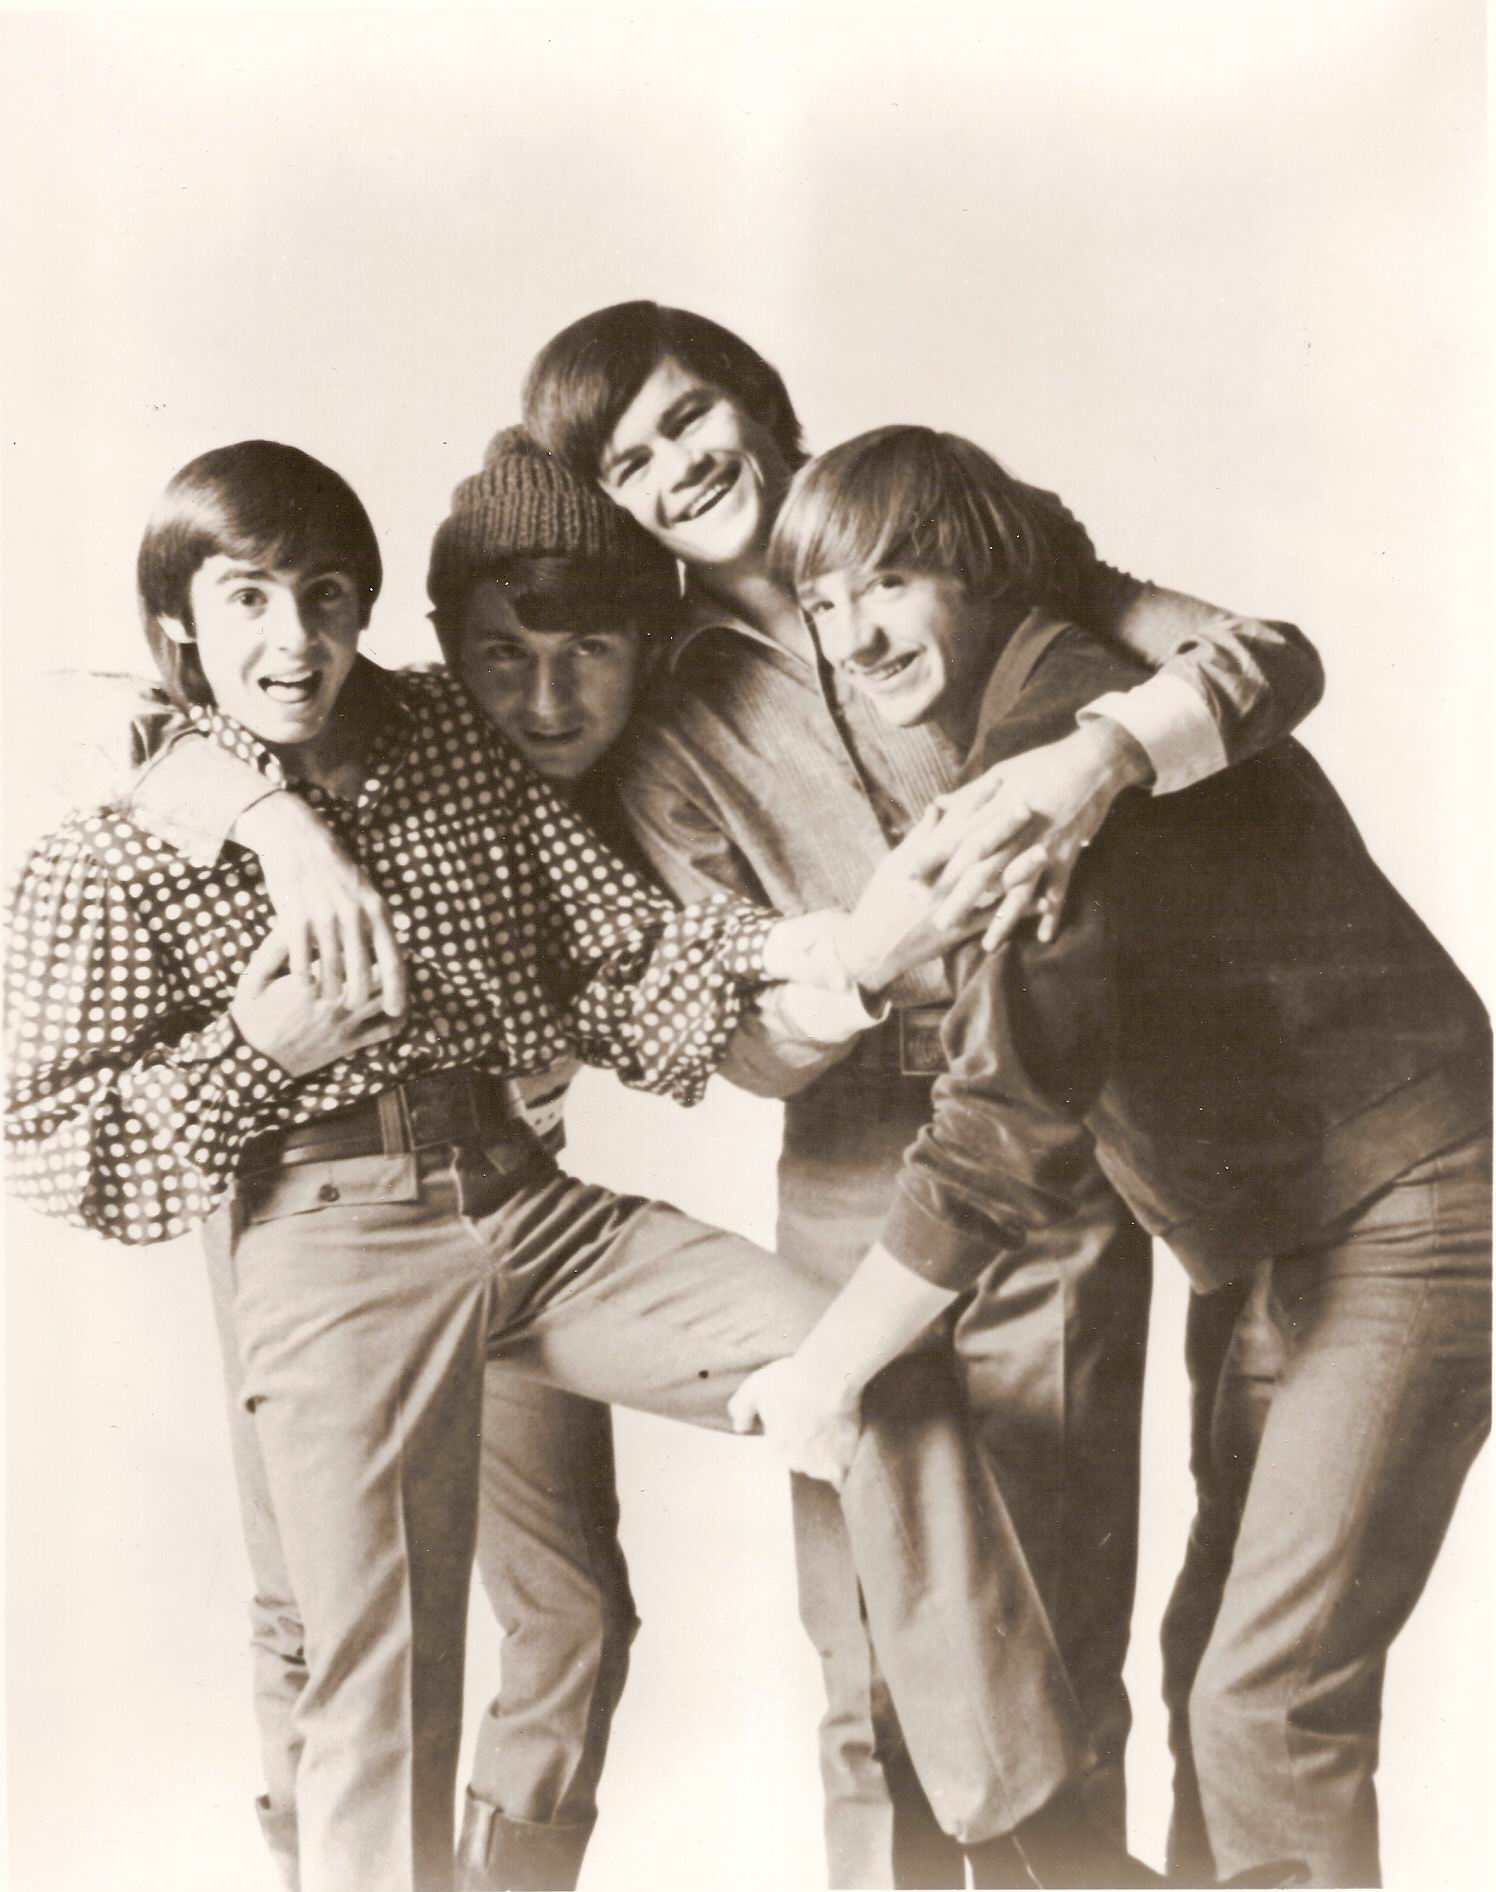 monkees 60's | The Monkees Home Page : The Monkees Home Page